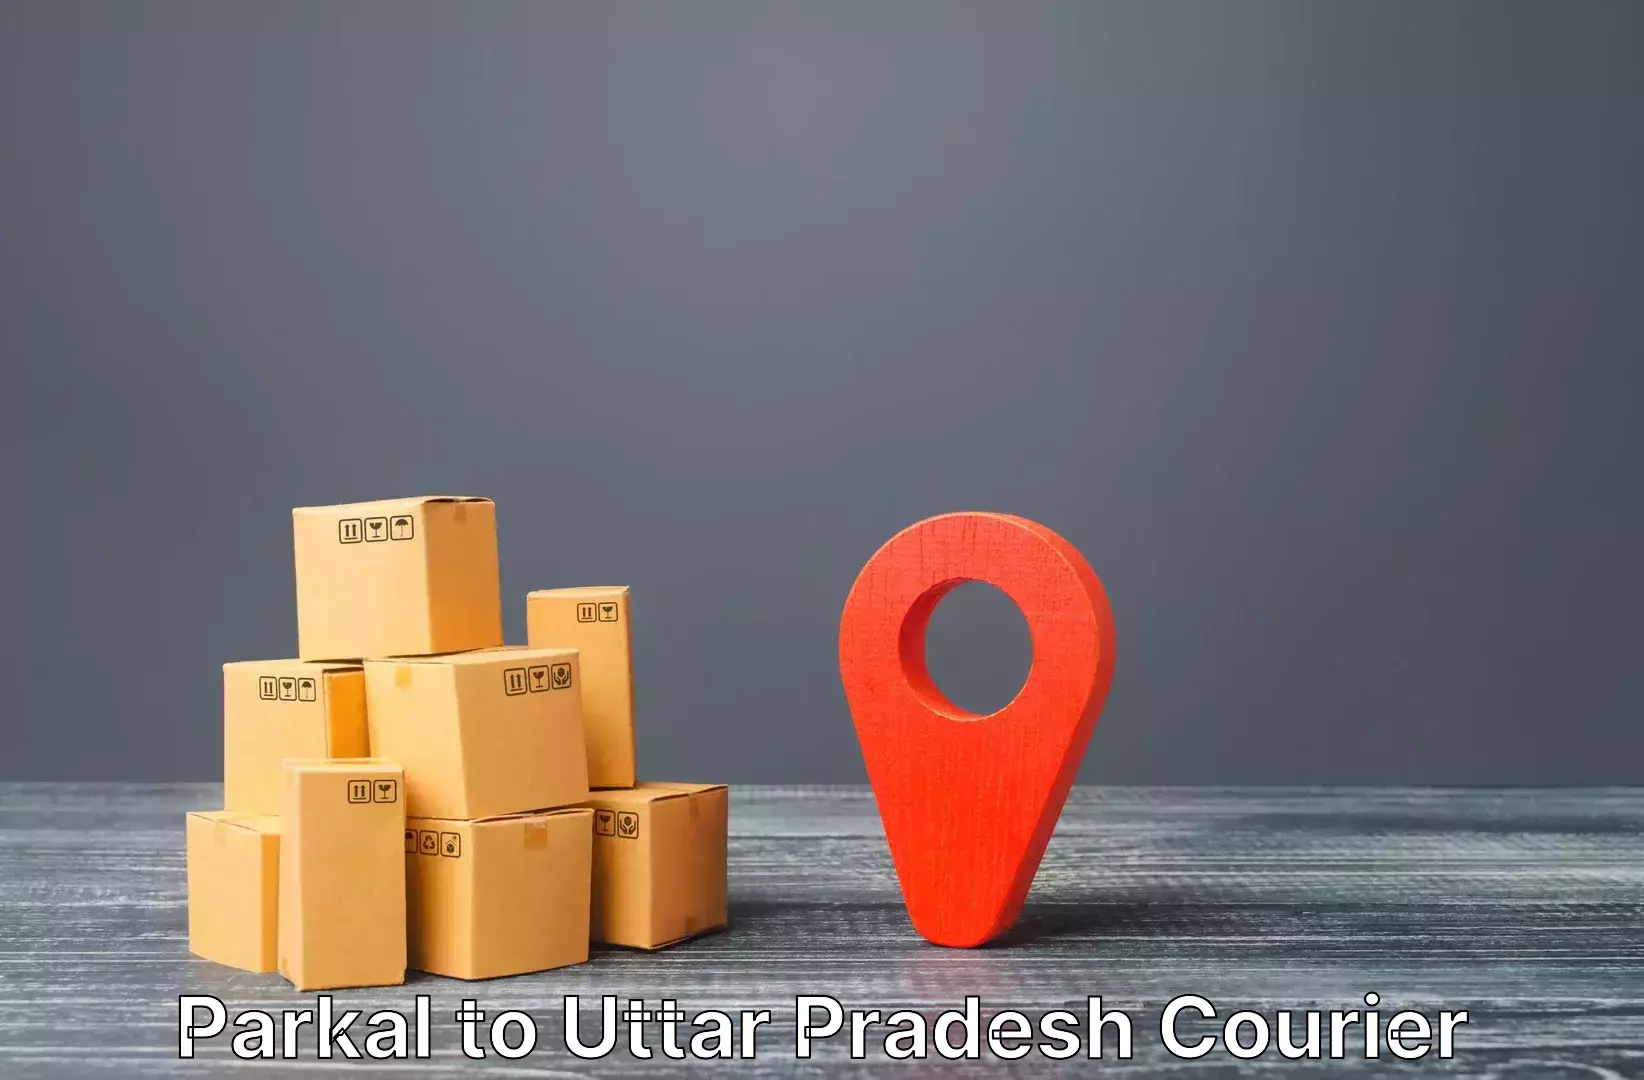 Luggage delivery logistics in Parkal to Sikandra Rao